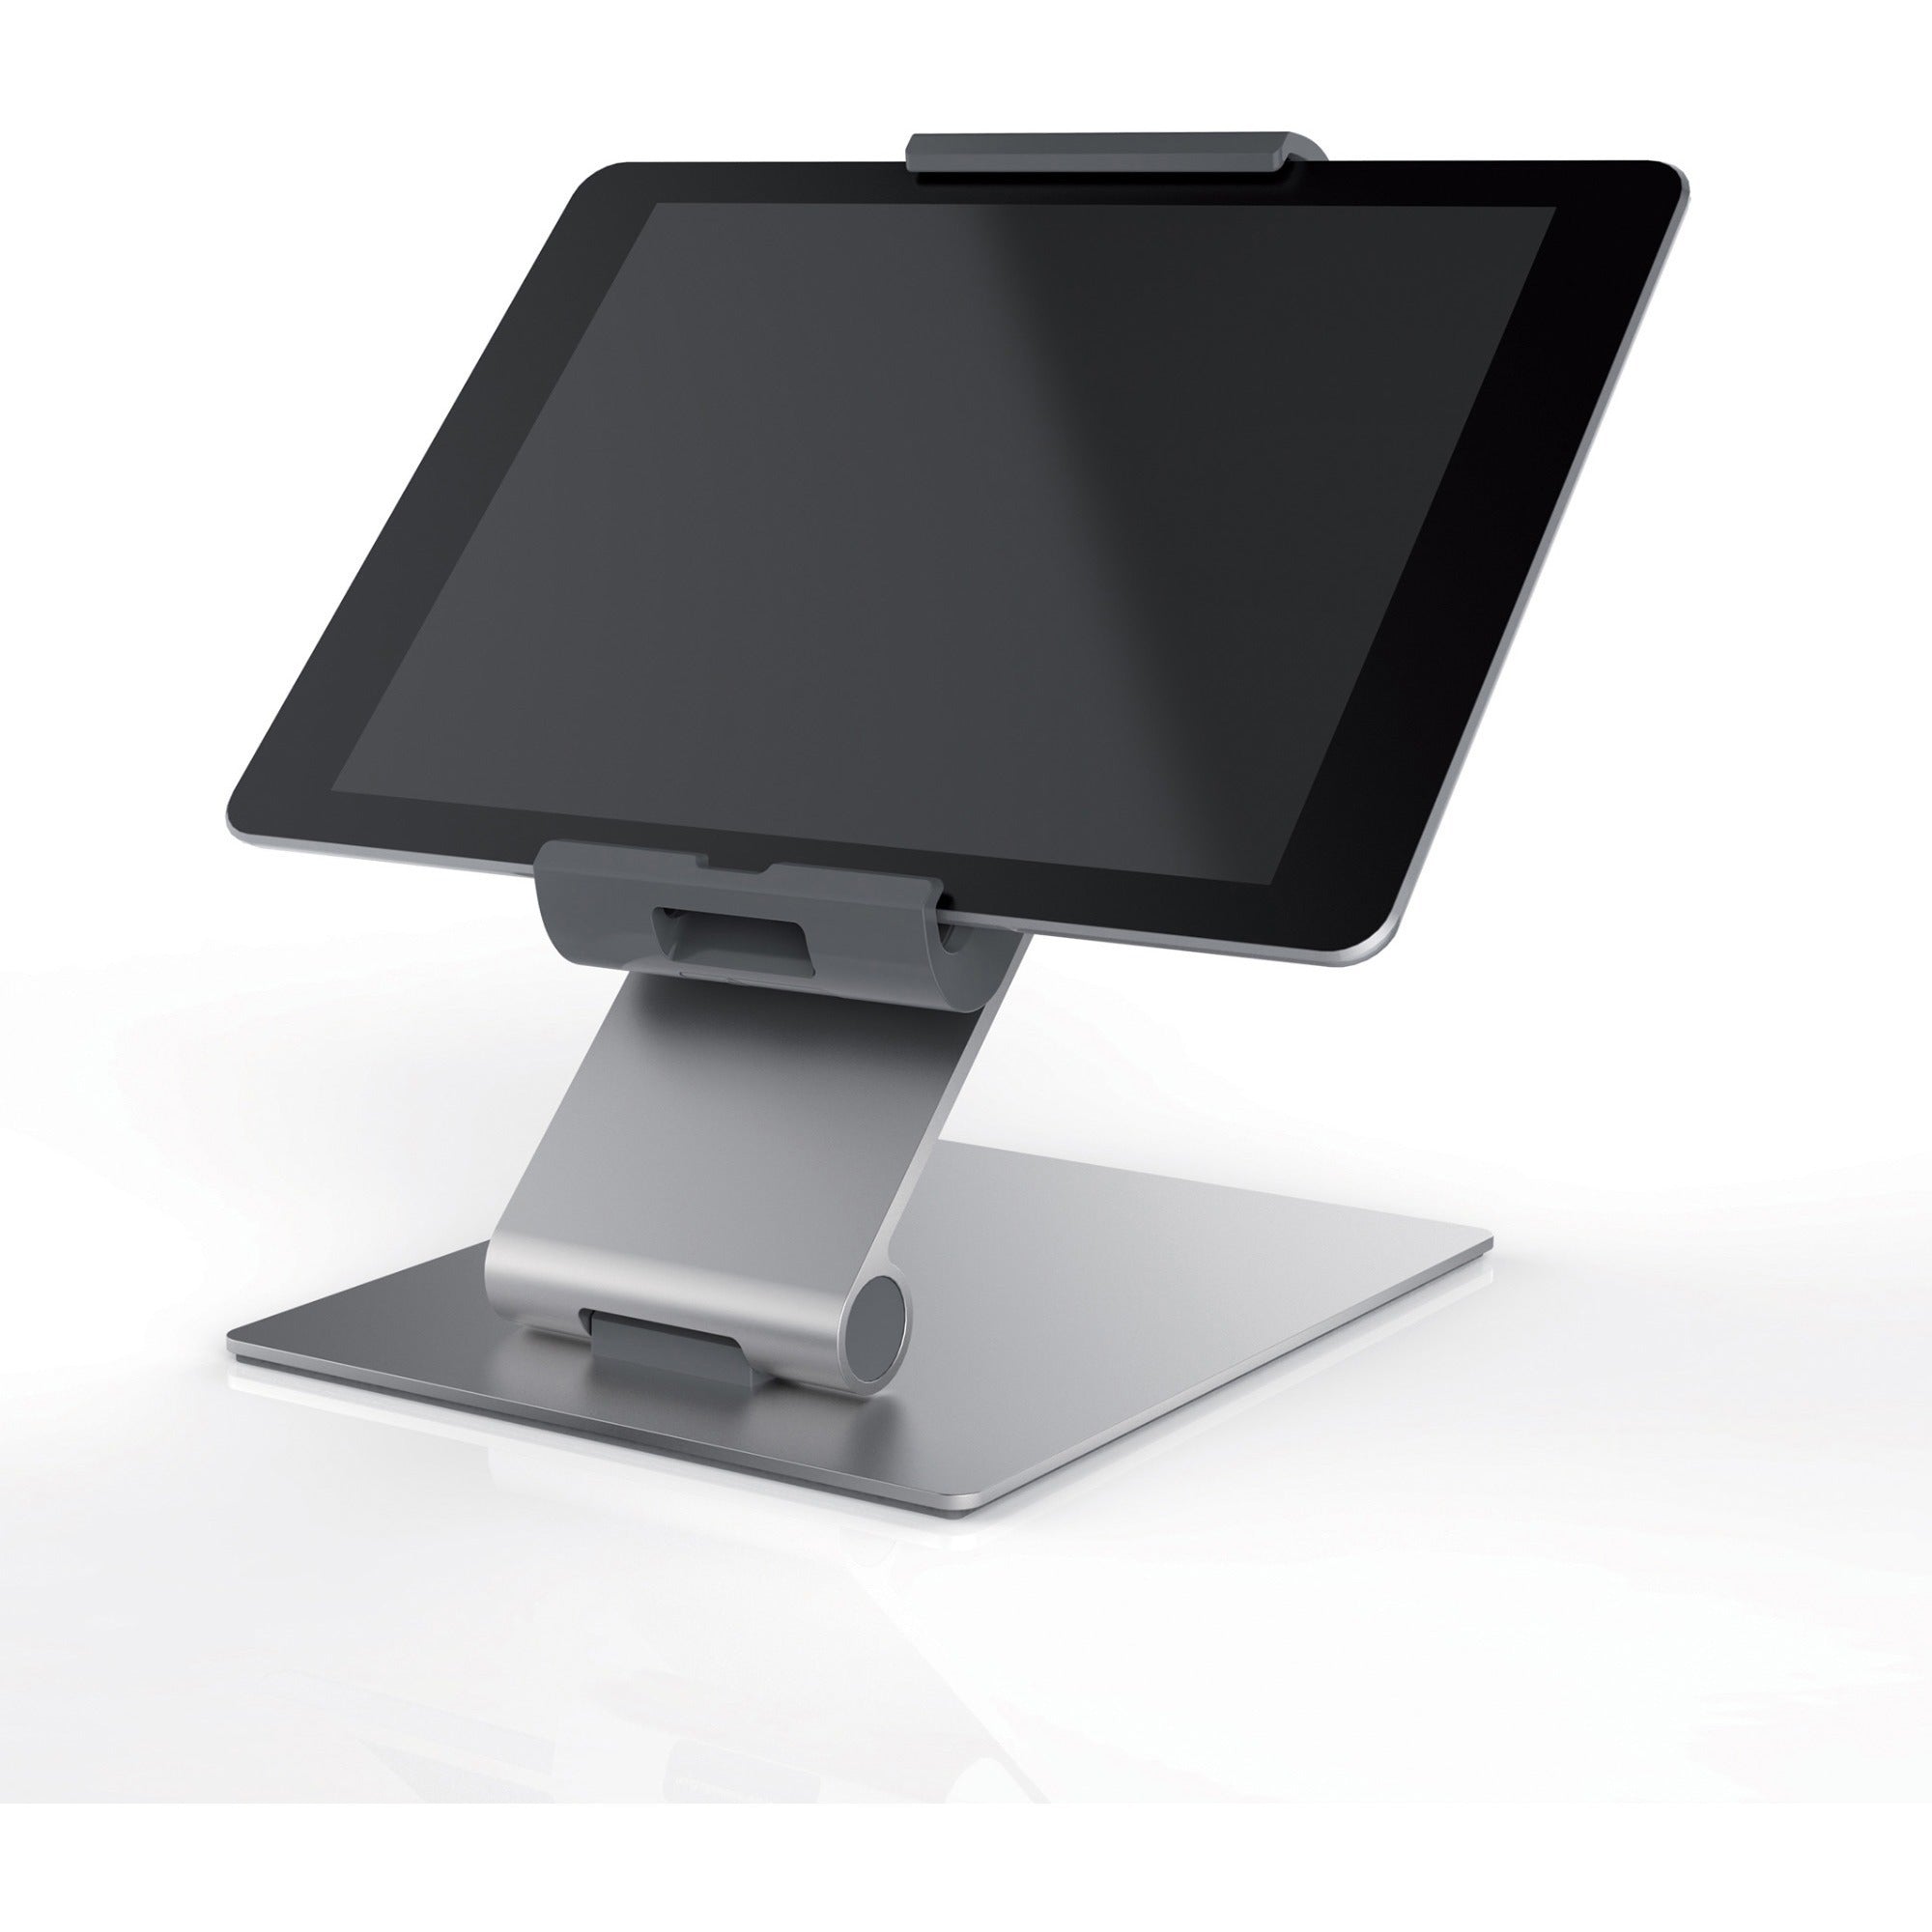 durable-tablet-holder-desk-stand-fits-most-7-13-tablets-360-degrees-rotation-with-anti-theft-device-silver-charcoal_dbl893023 - 2